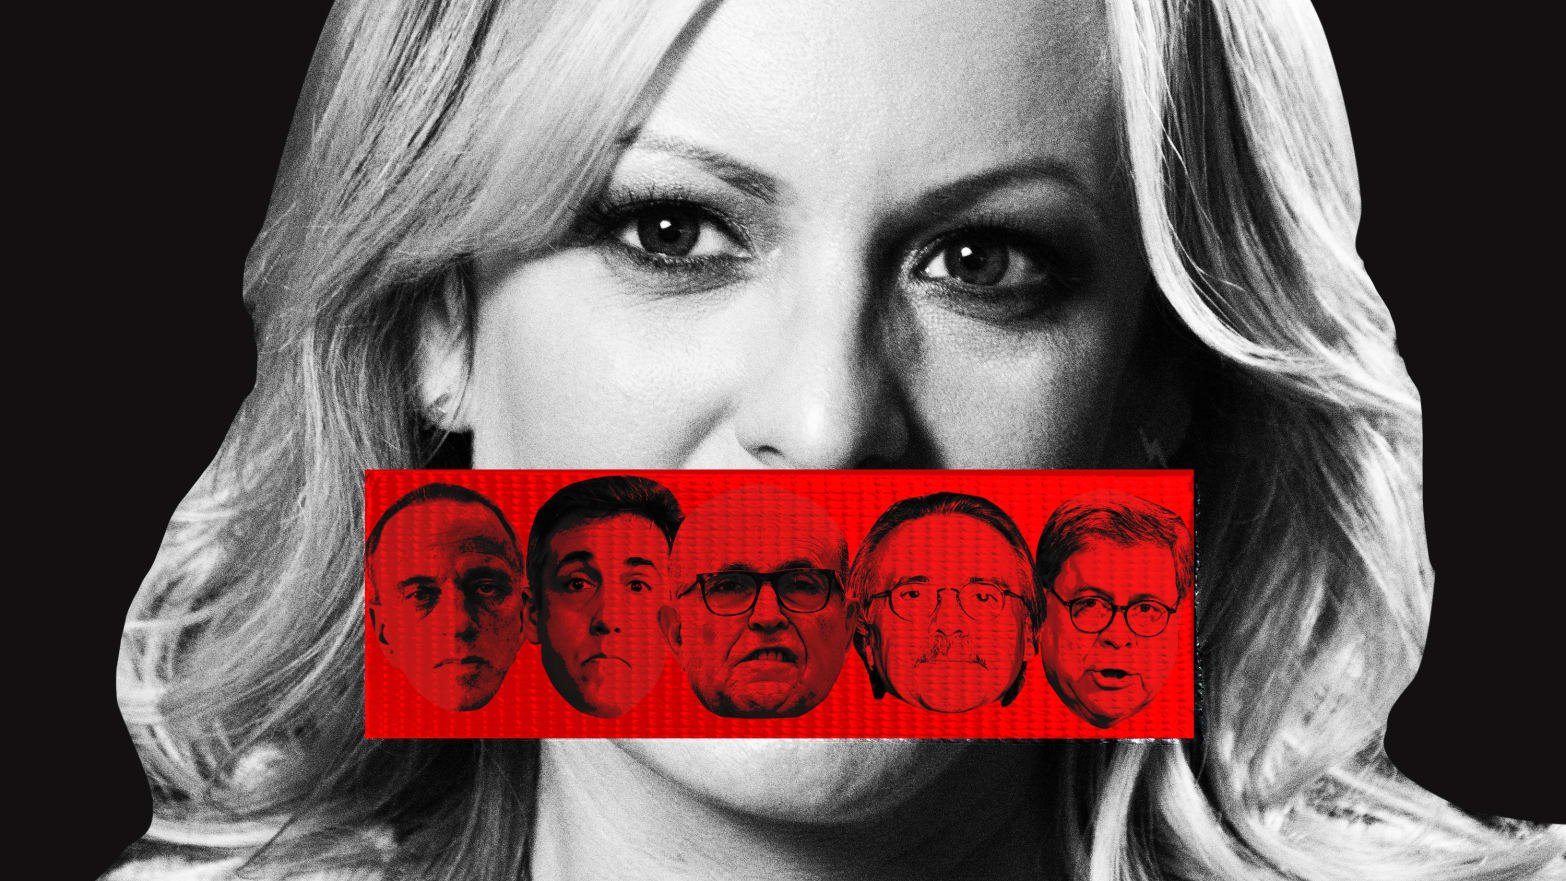 How Trumps Fixers Silenced Stormy Daniels Just Days Before the 2016 Election